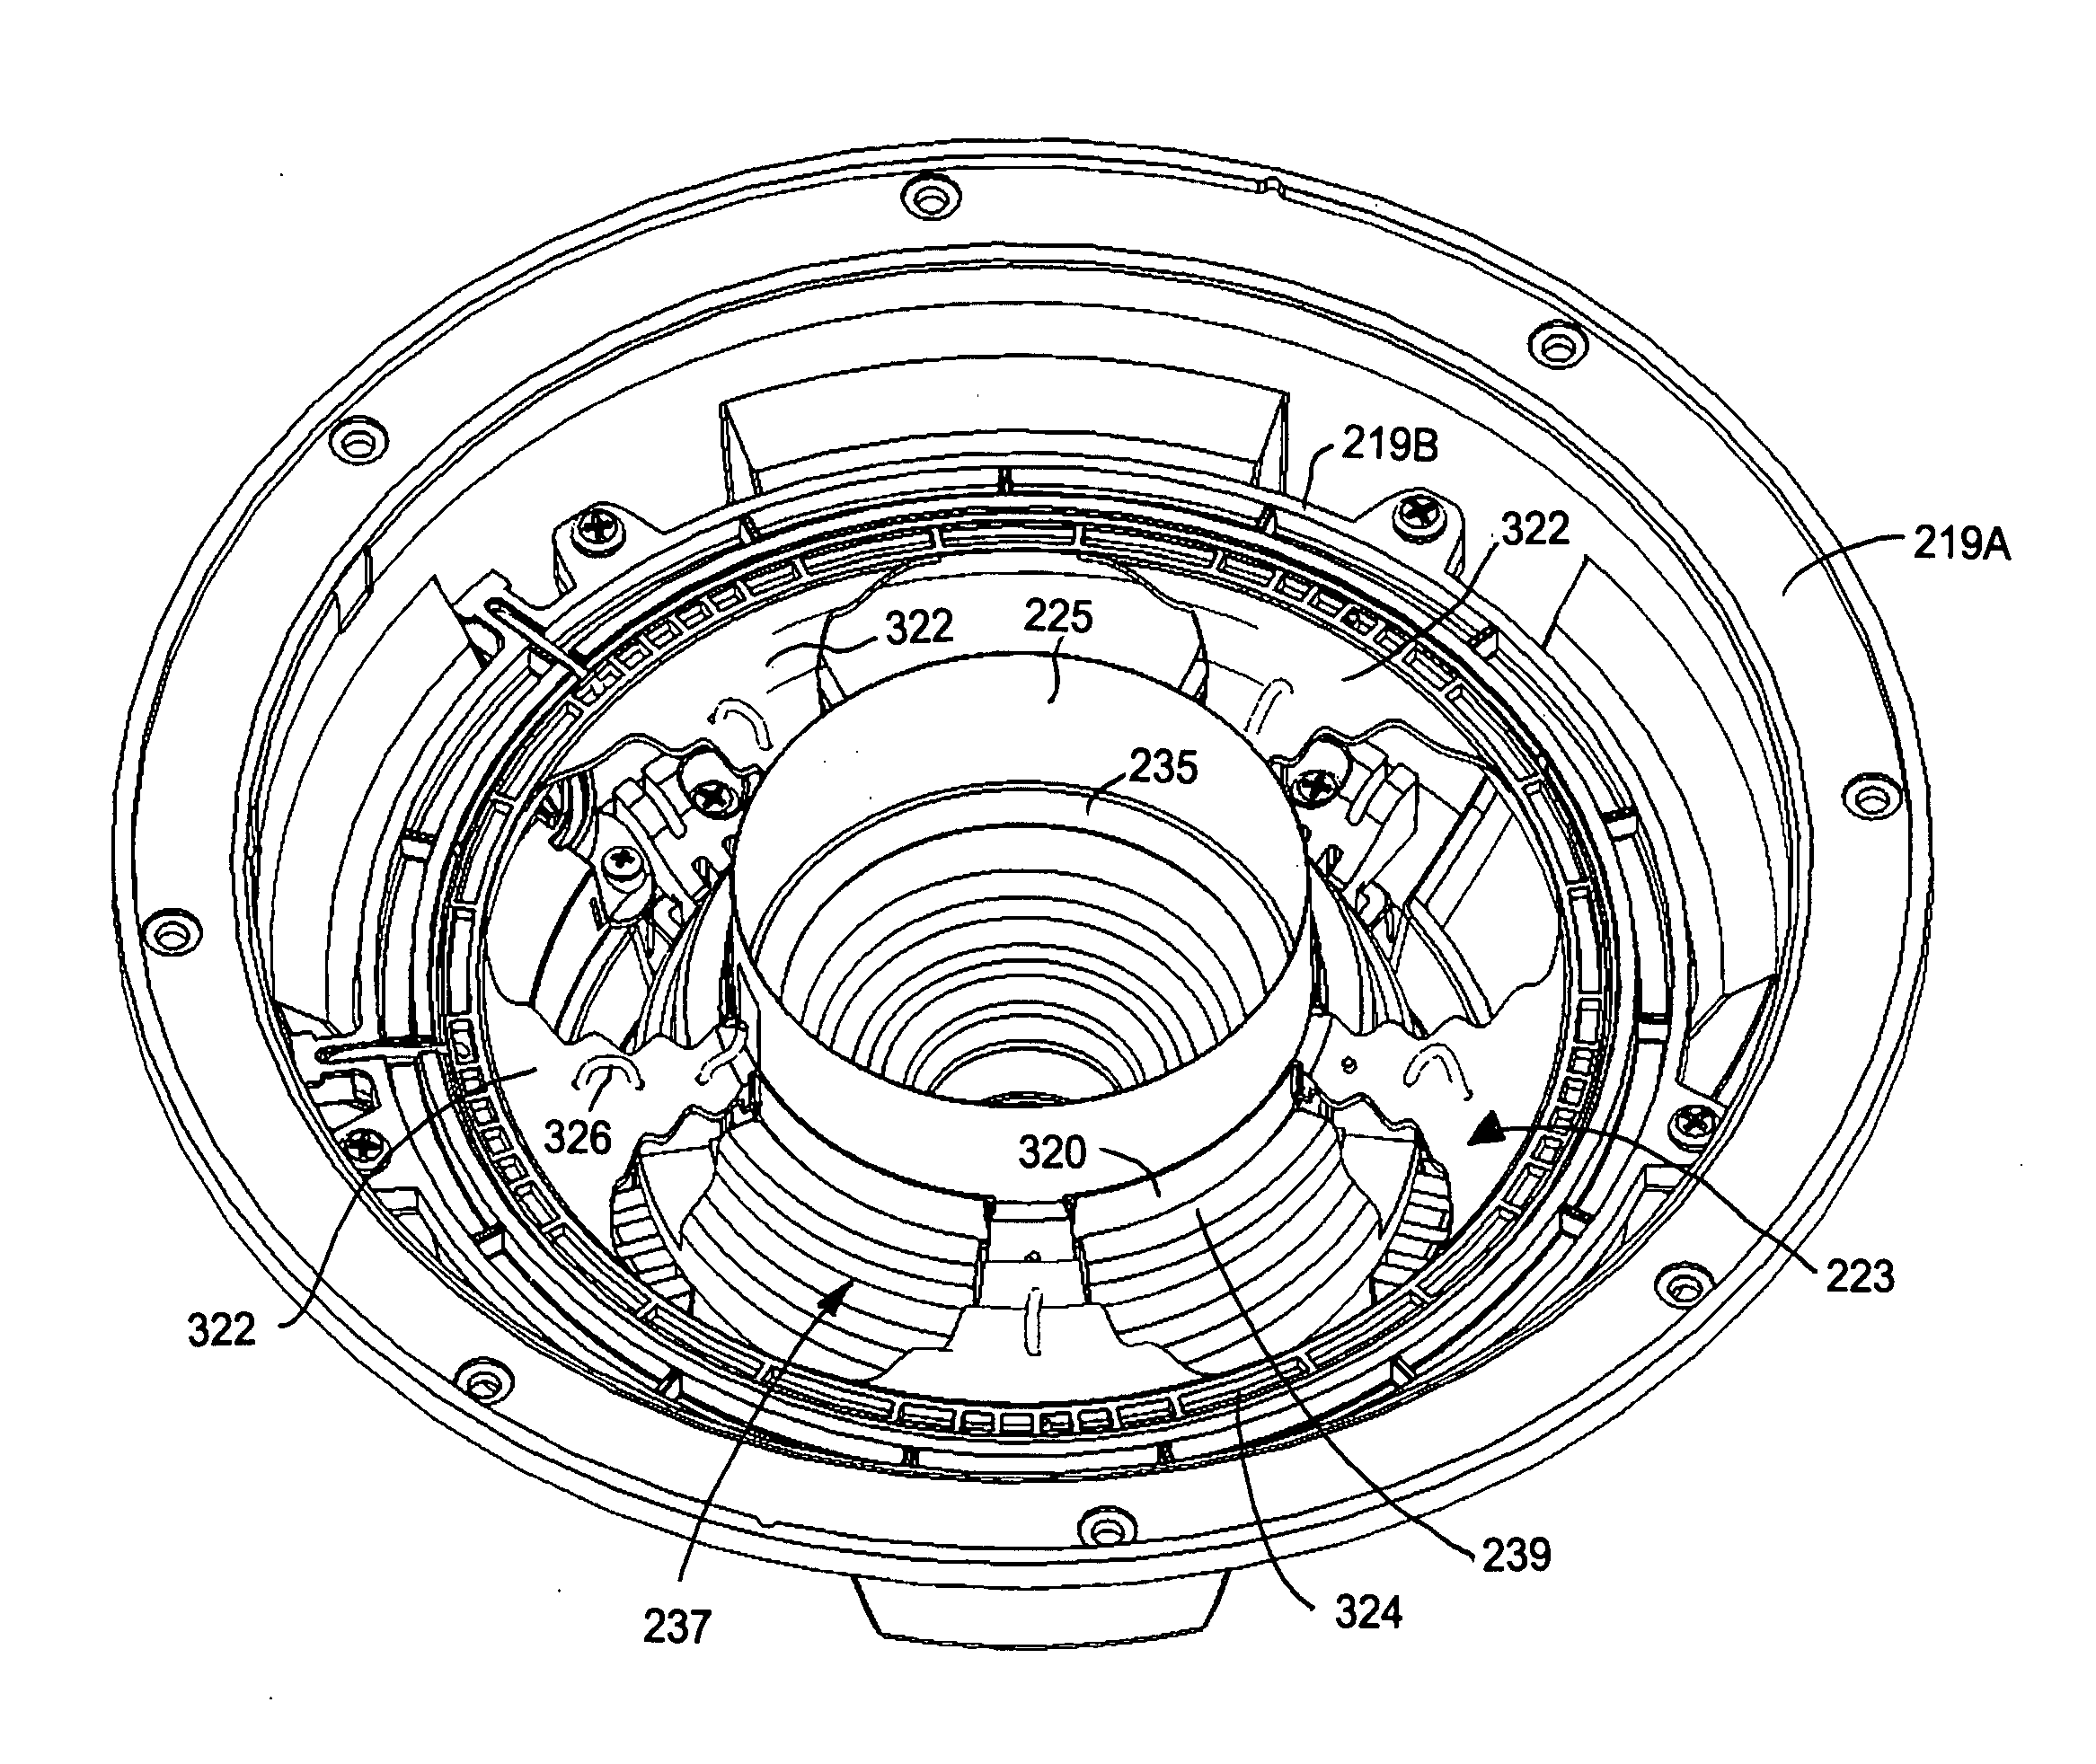 Structure of loudspeaker for reducing thickness and mounting depth